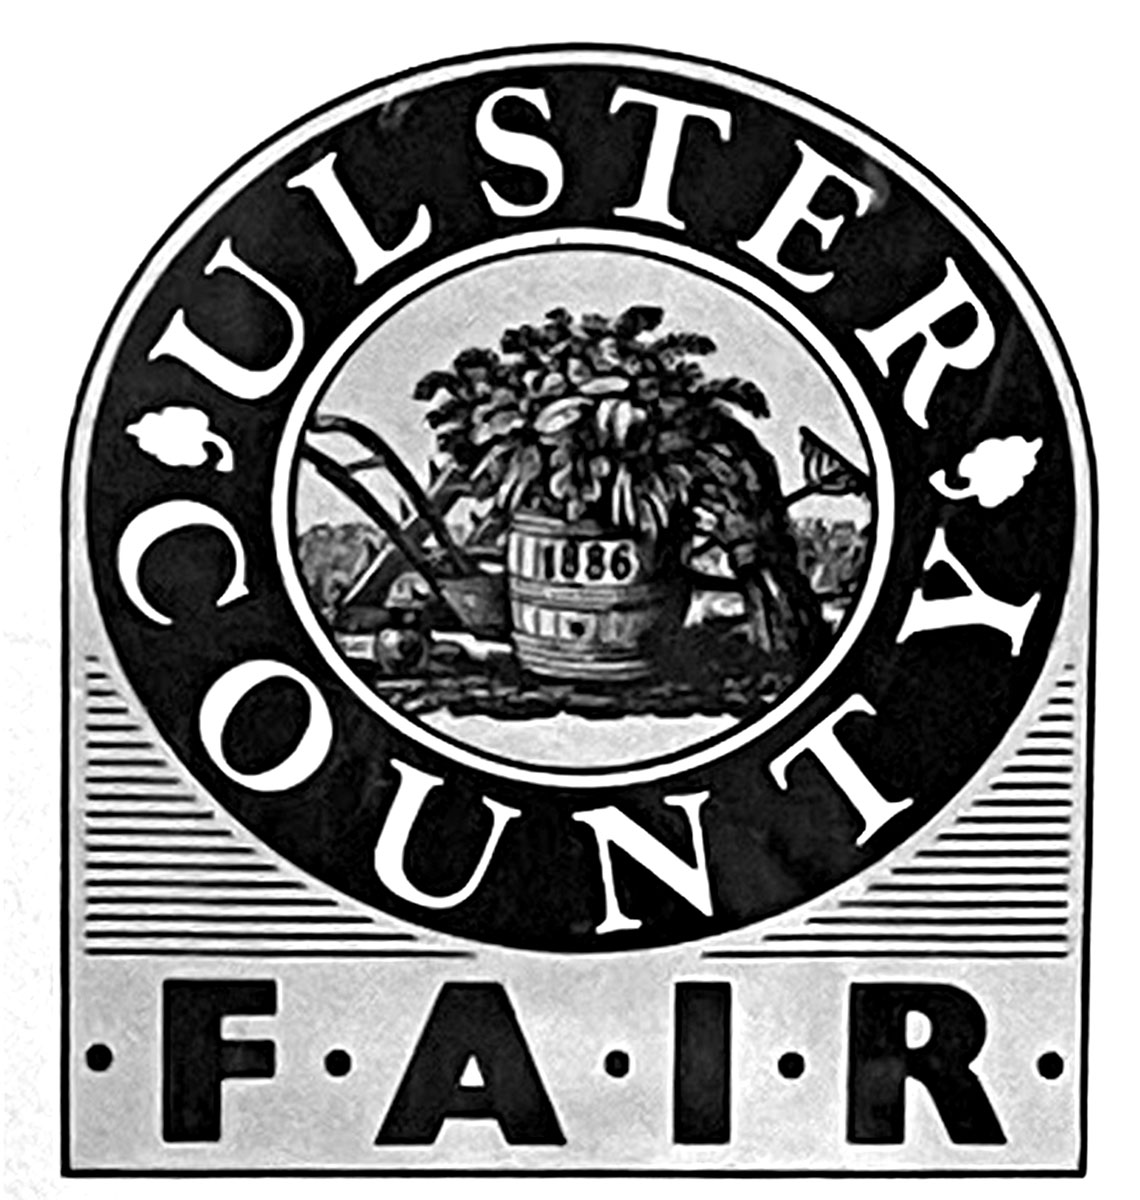 A version of the Ulster County Fair logo from the early 20th century.